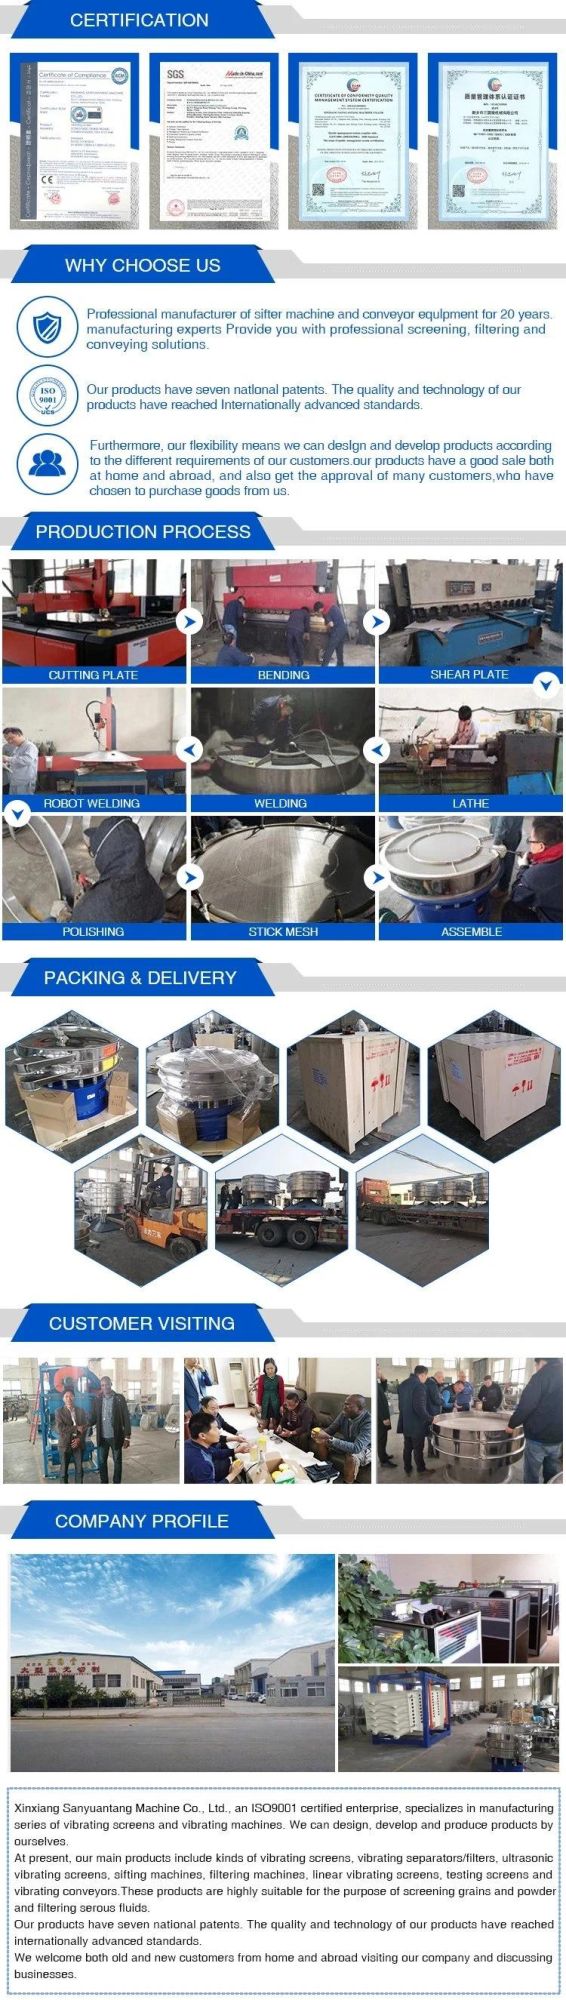 Bee Honey Processing Purify Extraction Refining Machine for Making Honey